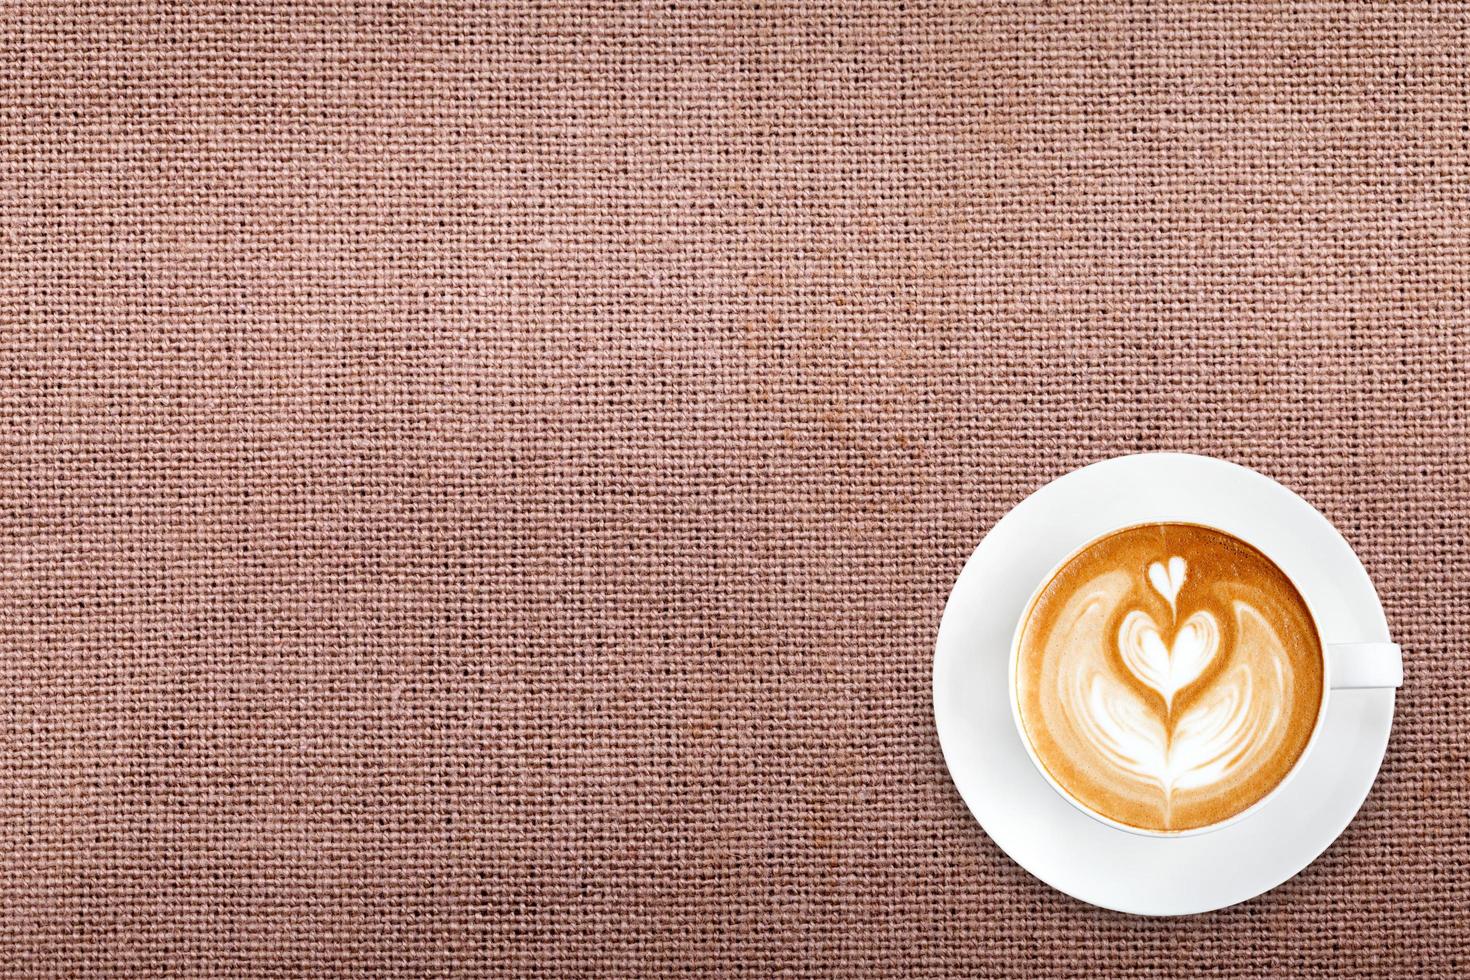 Top view latte art coffee on cotton fabric background photo